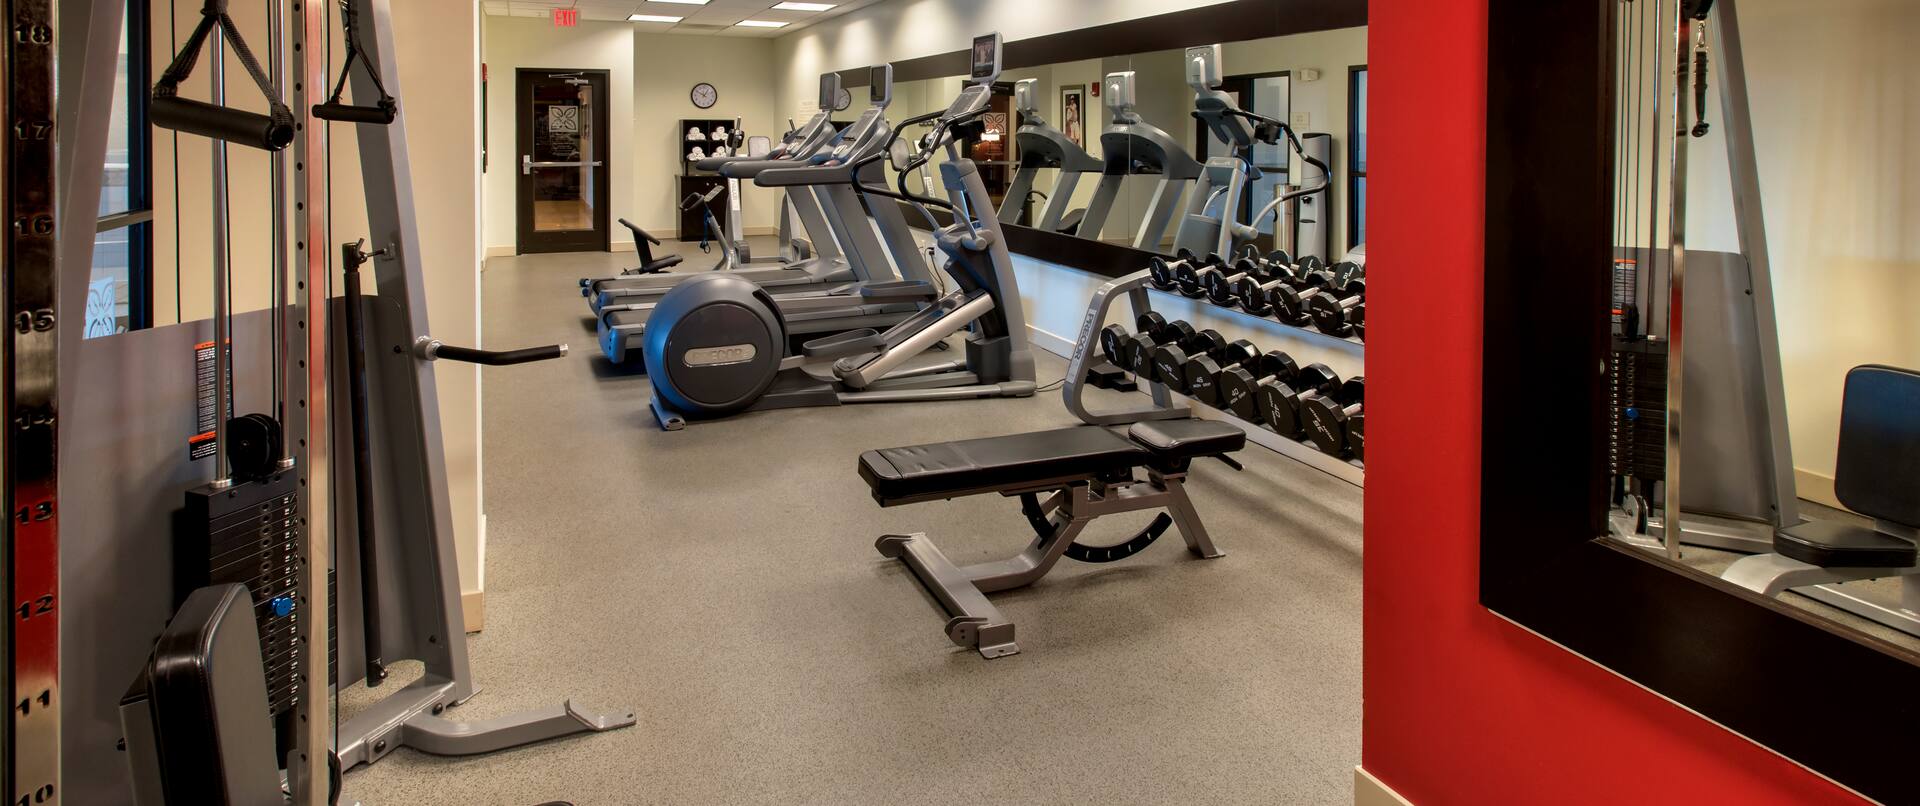 Gym with treadmills, weights, and other equipment.